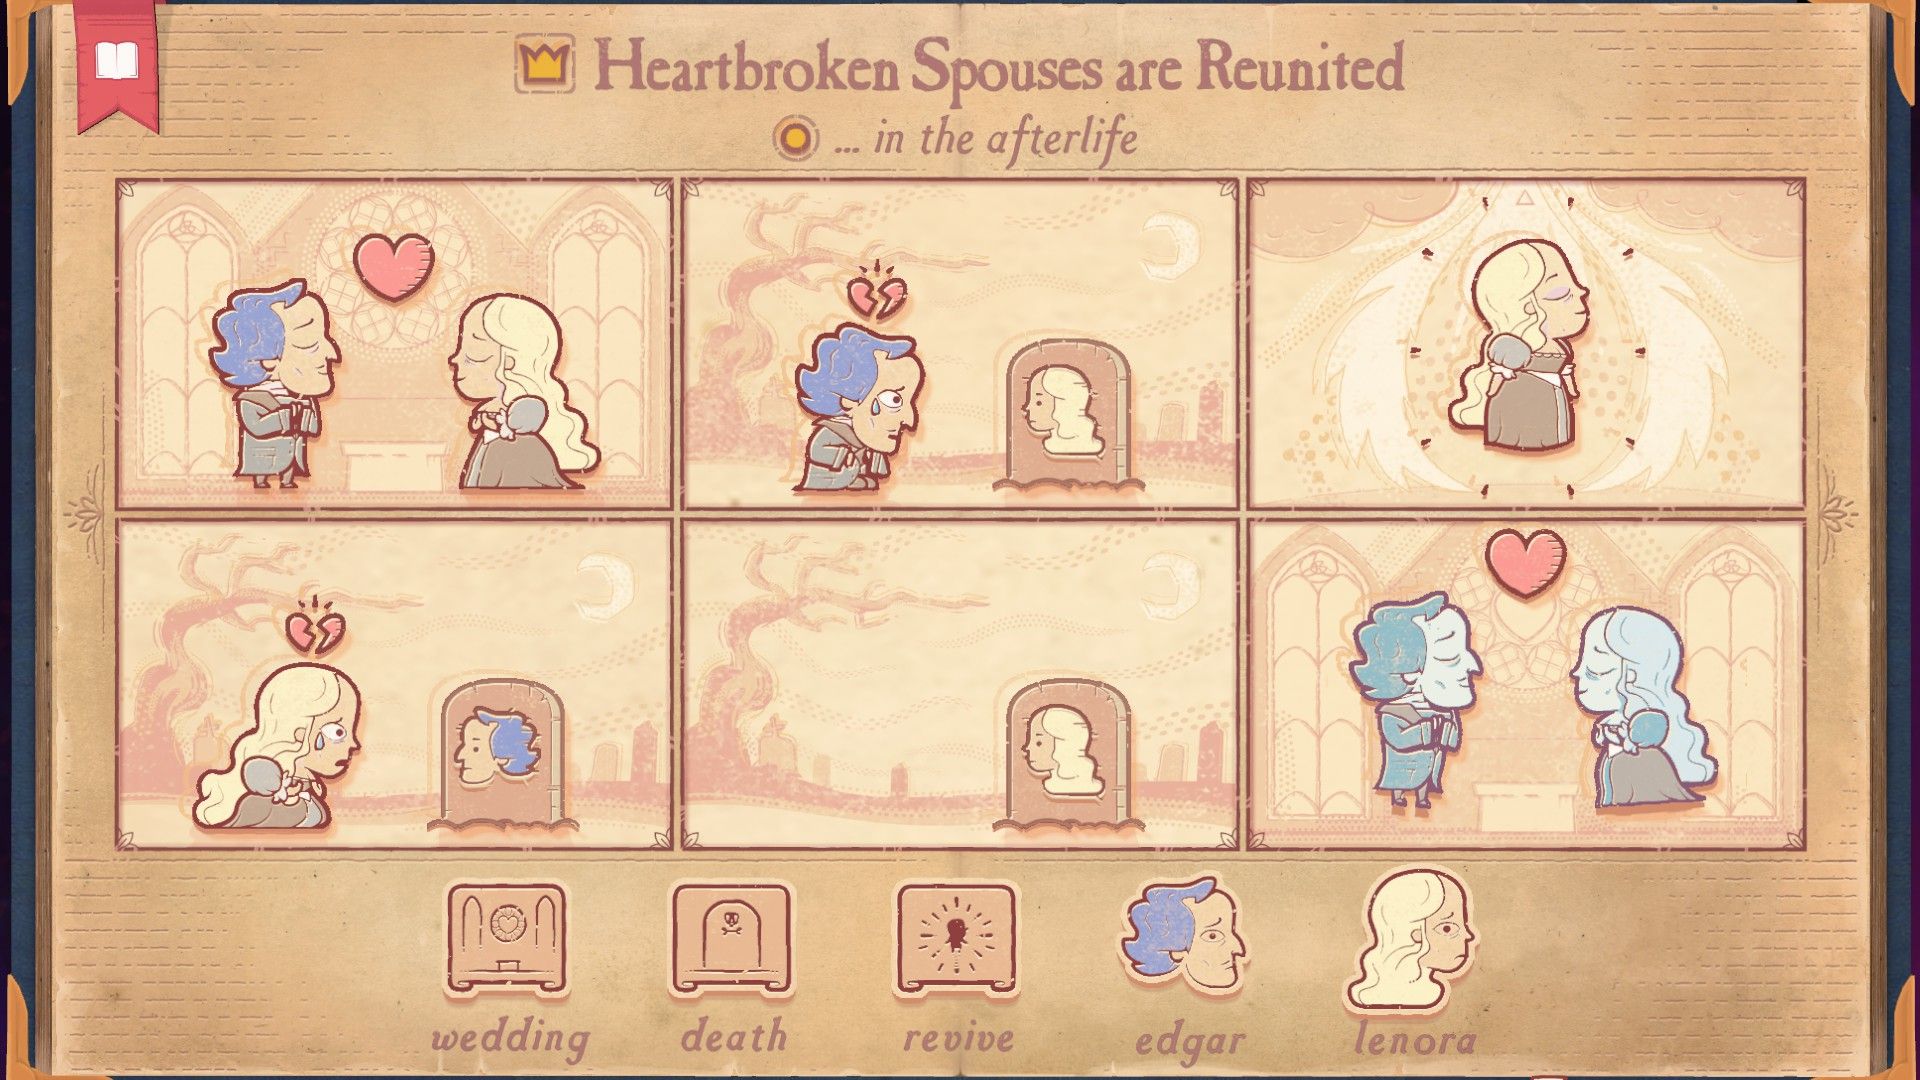 The secondary solution for the Reunion section of Stoyteller, showing two heartbroken spouses reuniting in the afterlife.